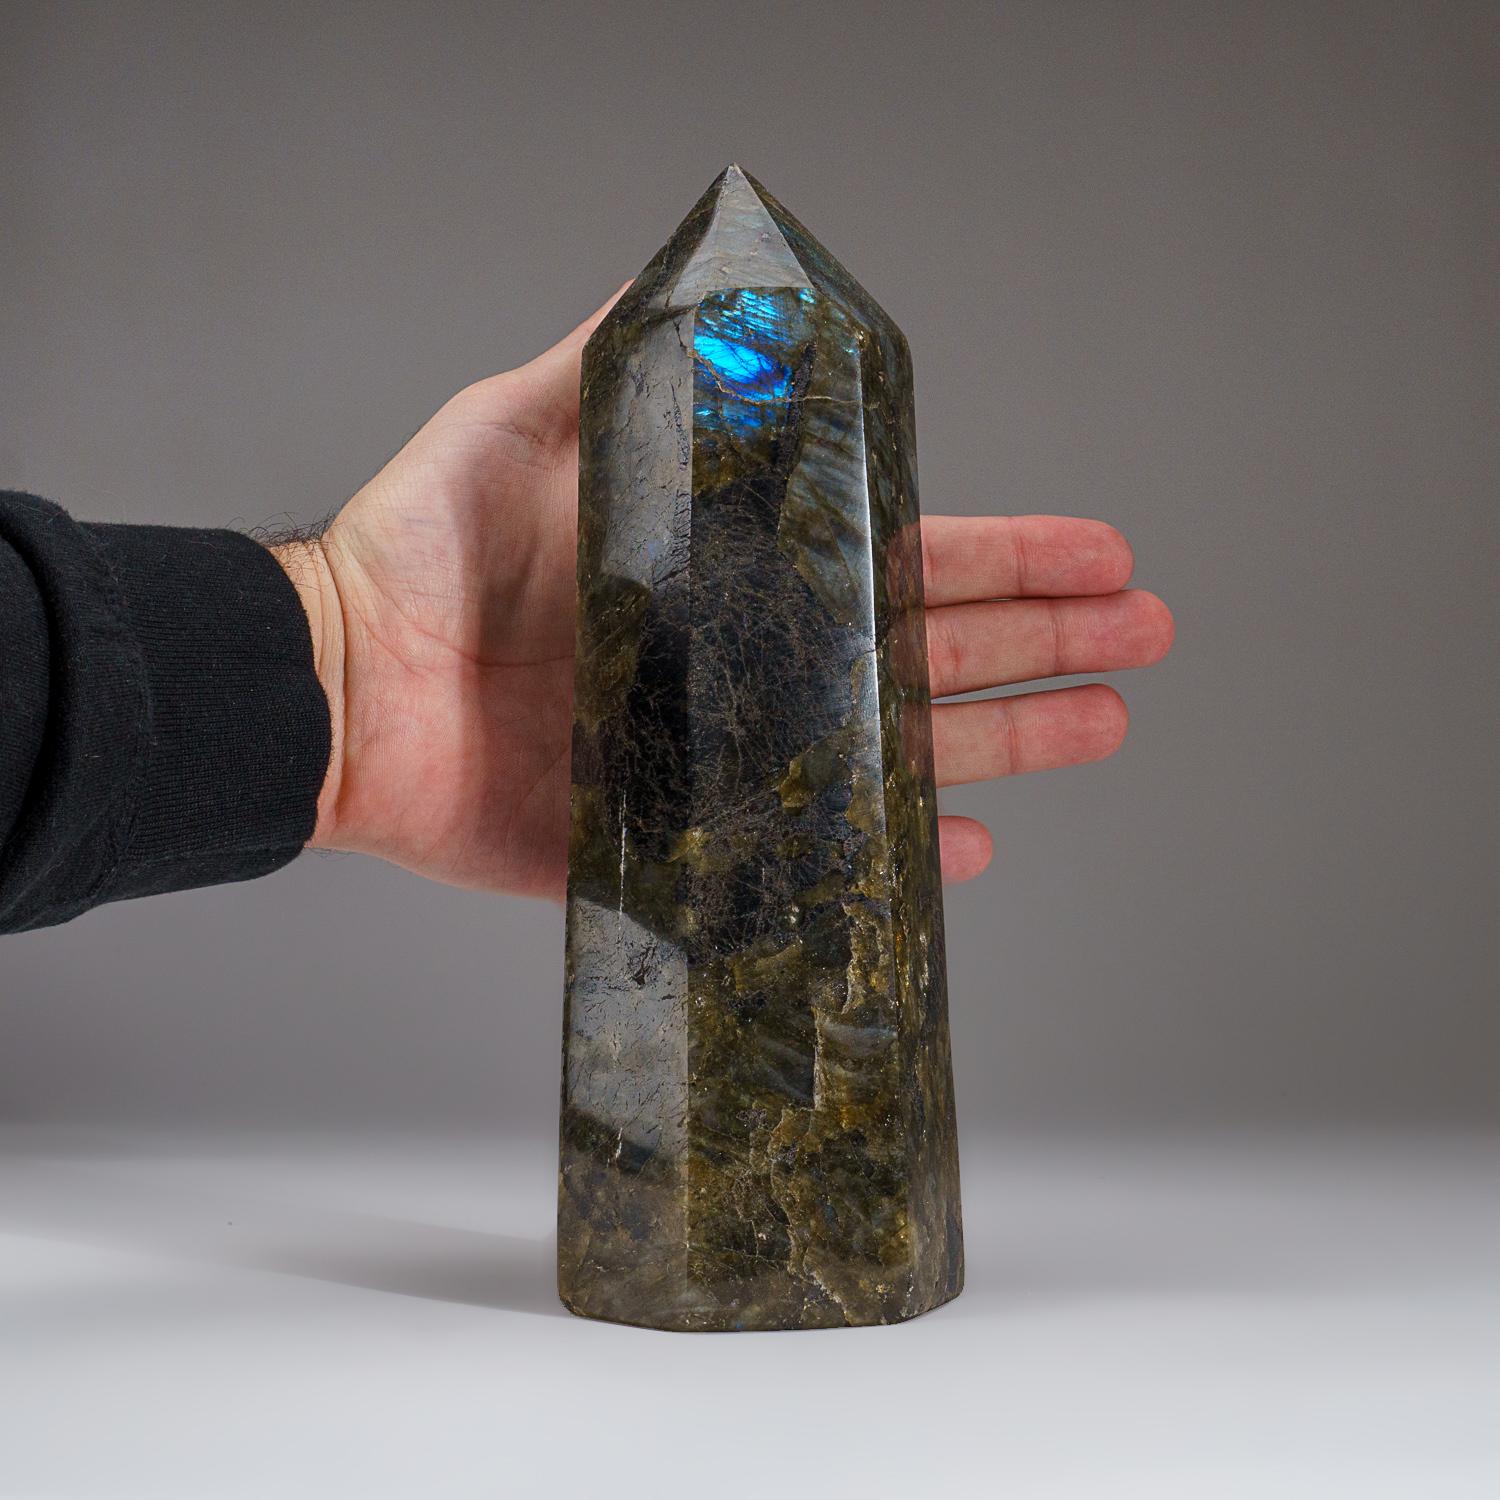 Malagasy Polished Labradorite Obelisk from Madagascar (4.9 lbs) For Sale